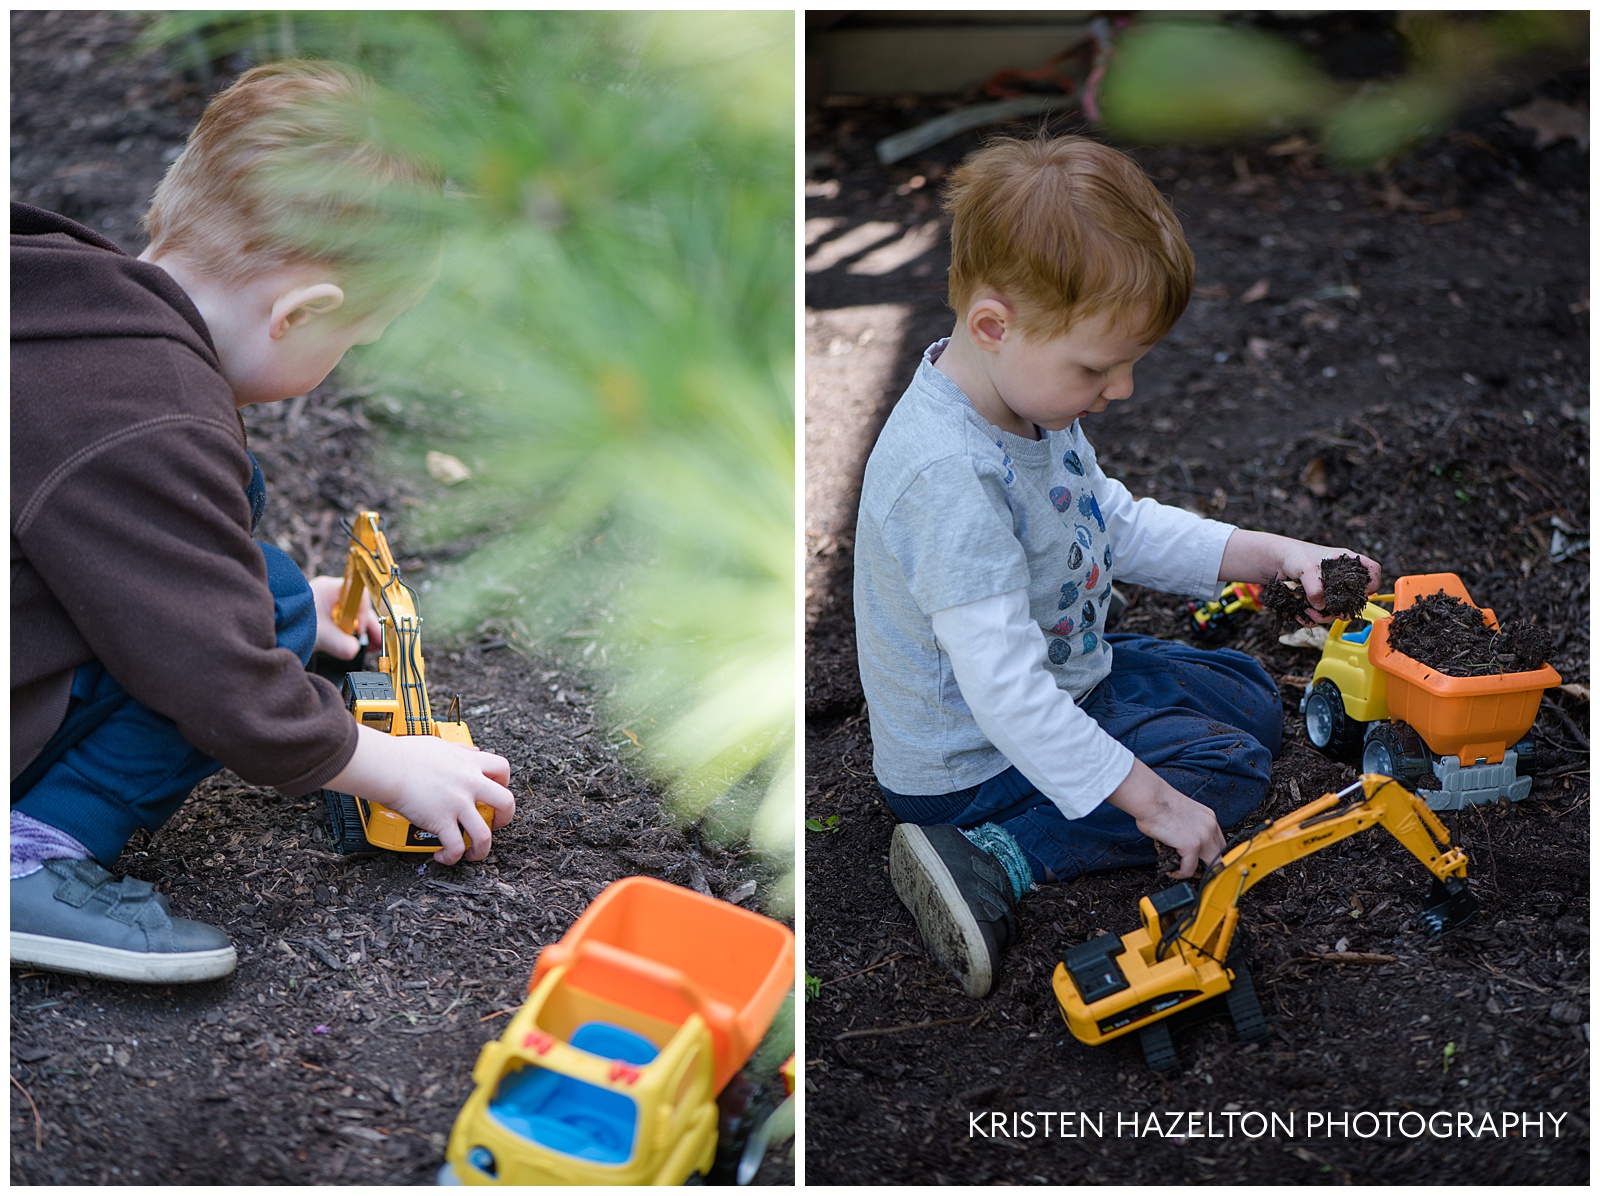 Toddler playing in the dirt with excavator and dump truck toys